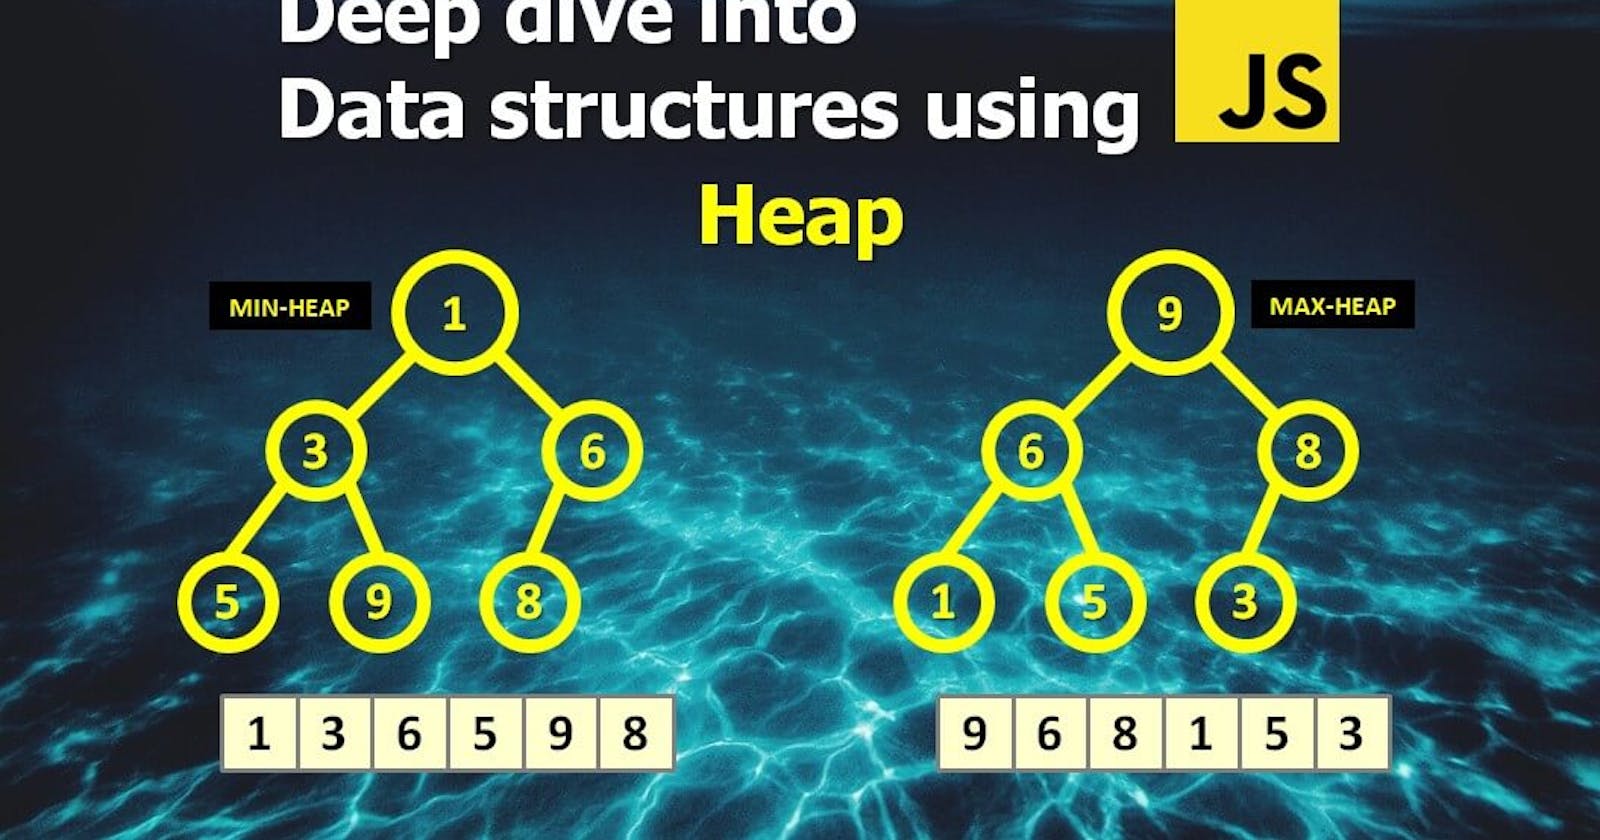 Deep Dive into Data structures using Javascript - Heap